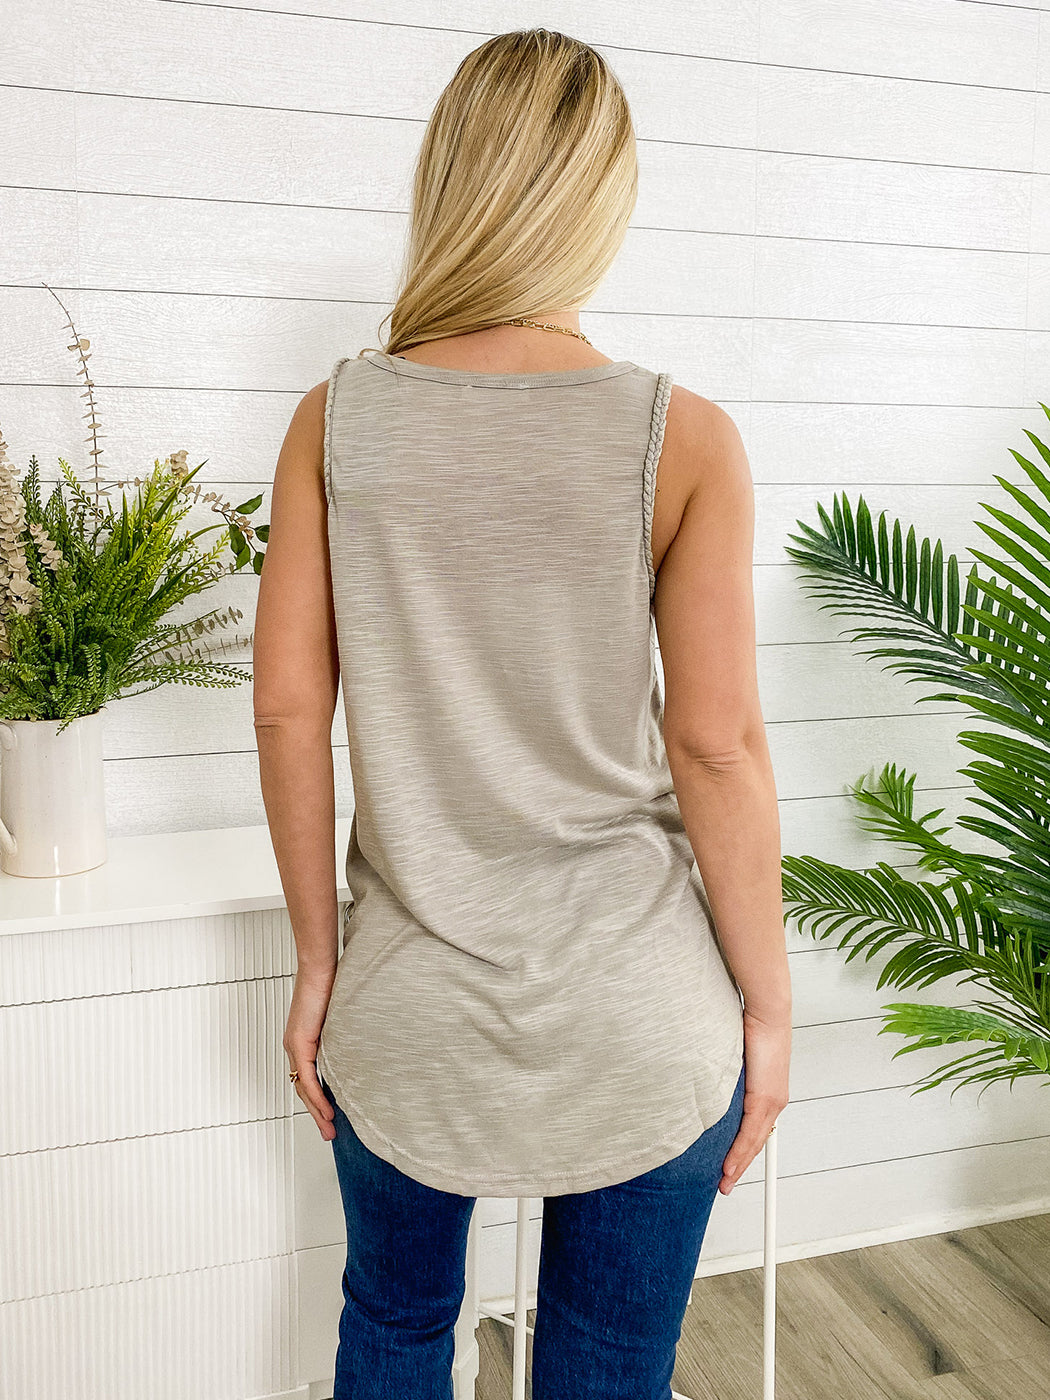 Athletic Wear Sleeveless Tank Top with Braid Details